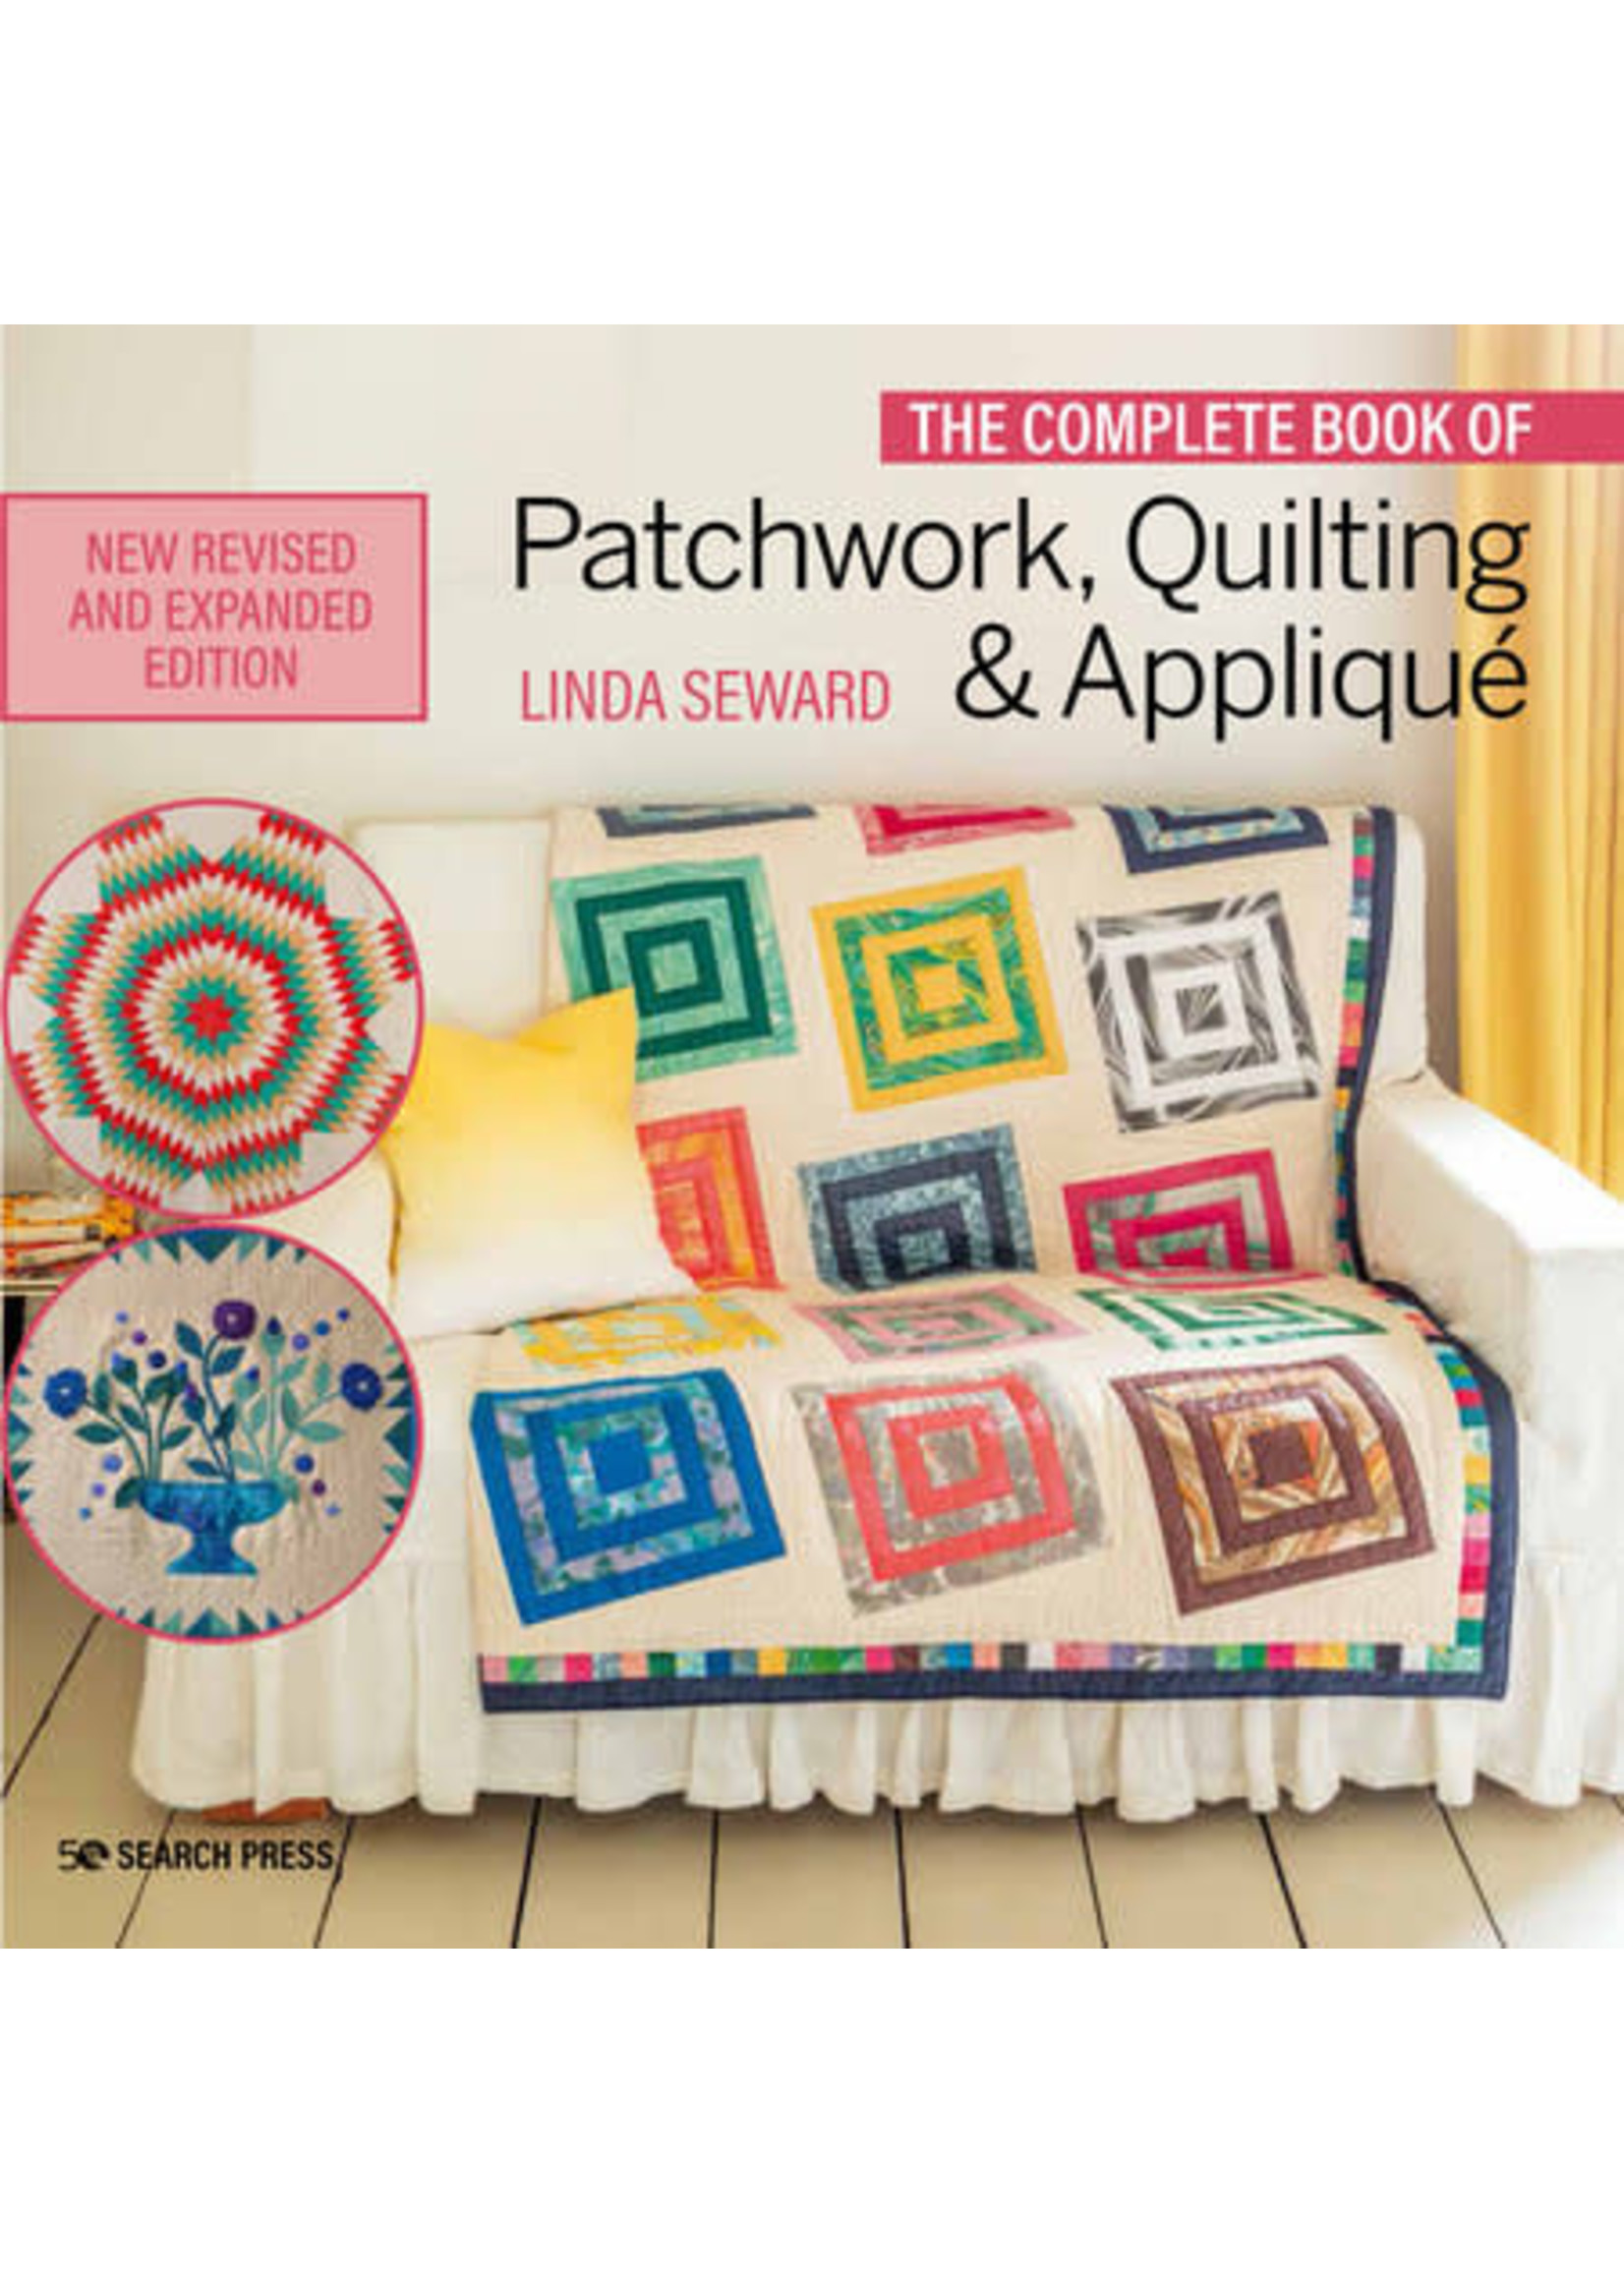 Complete Book of Patchwork, Quilting & Applique, The By Linda Seward